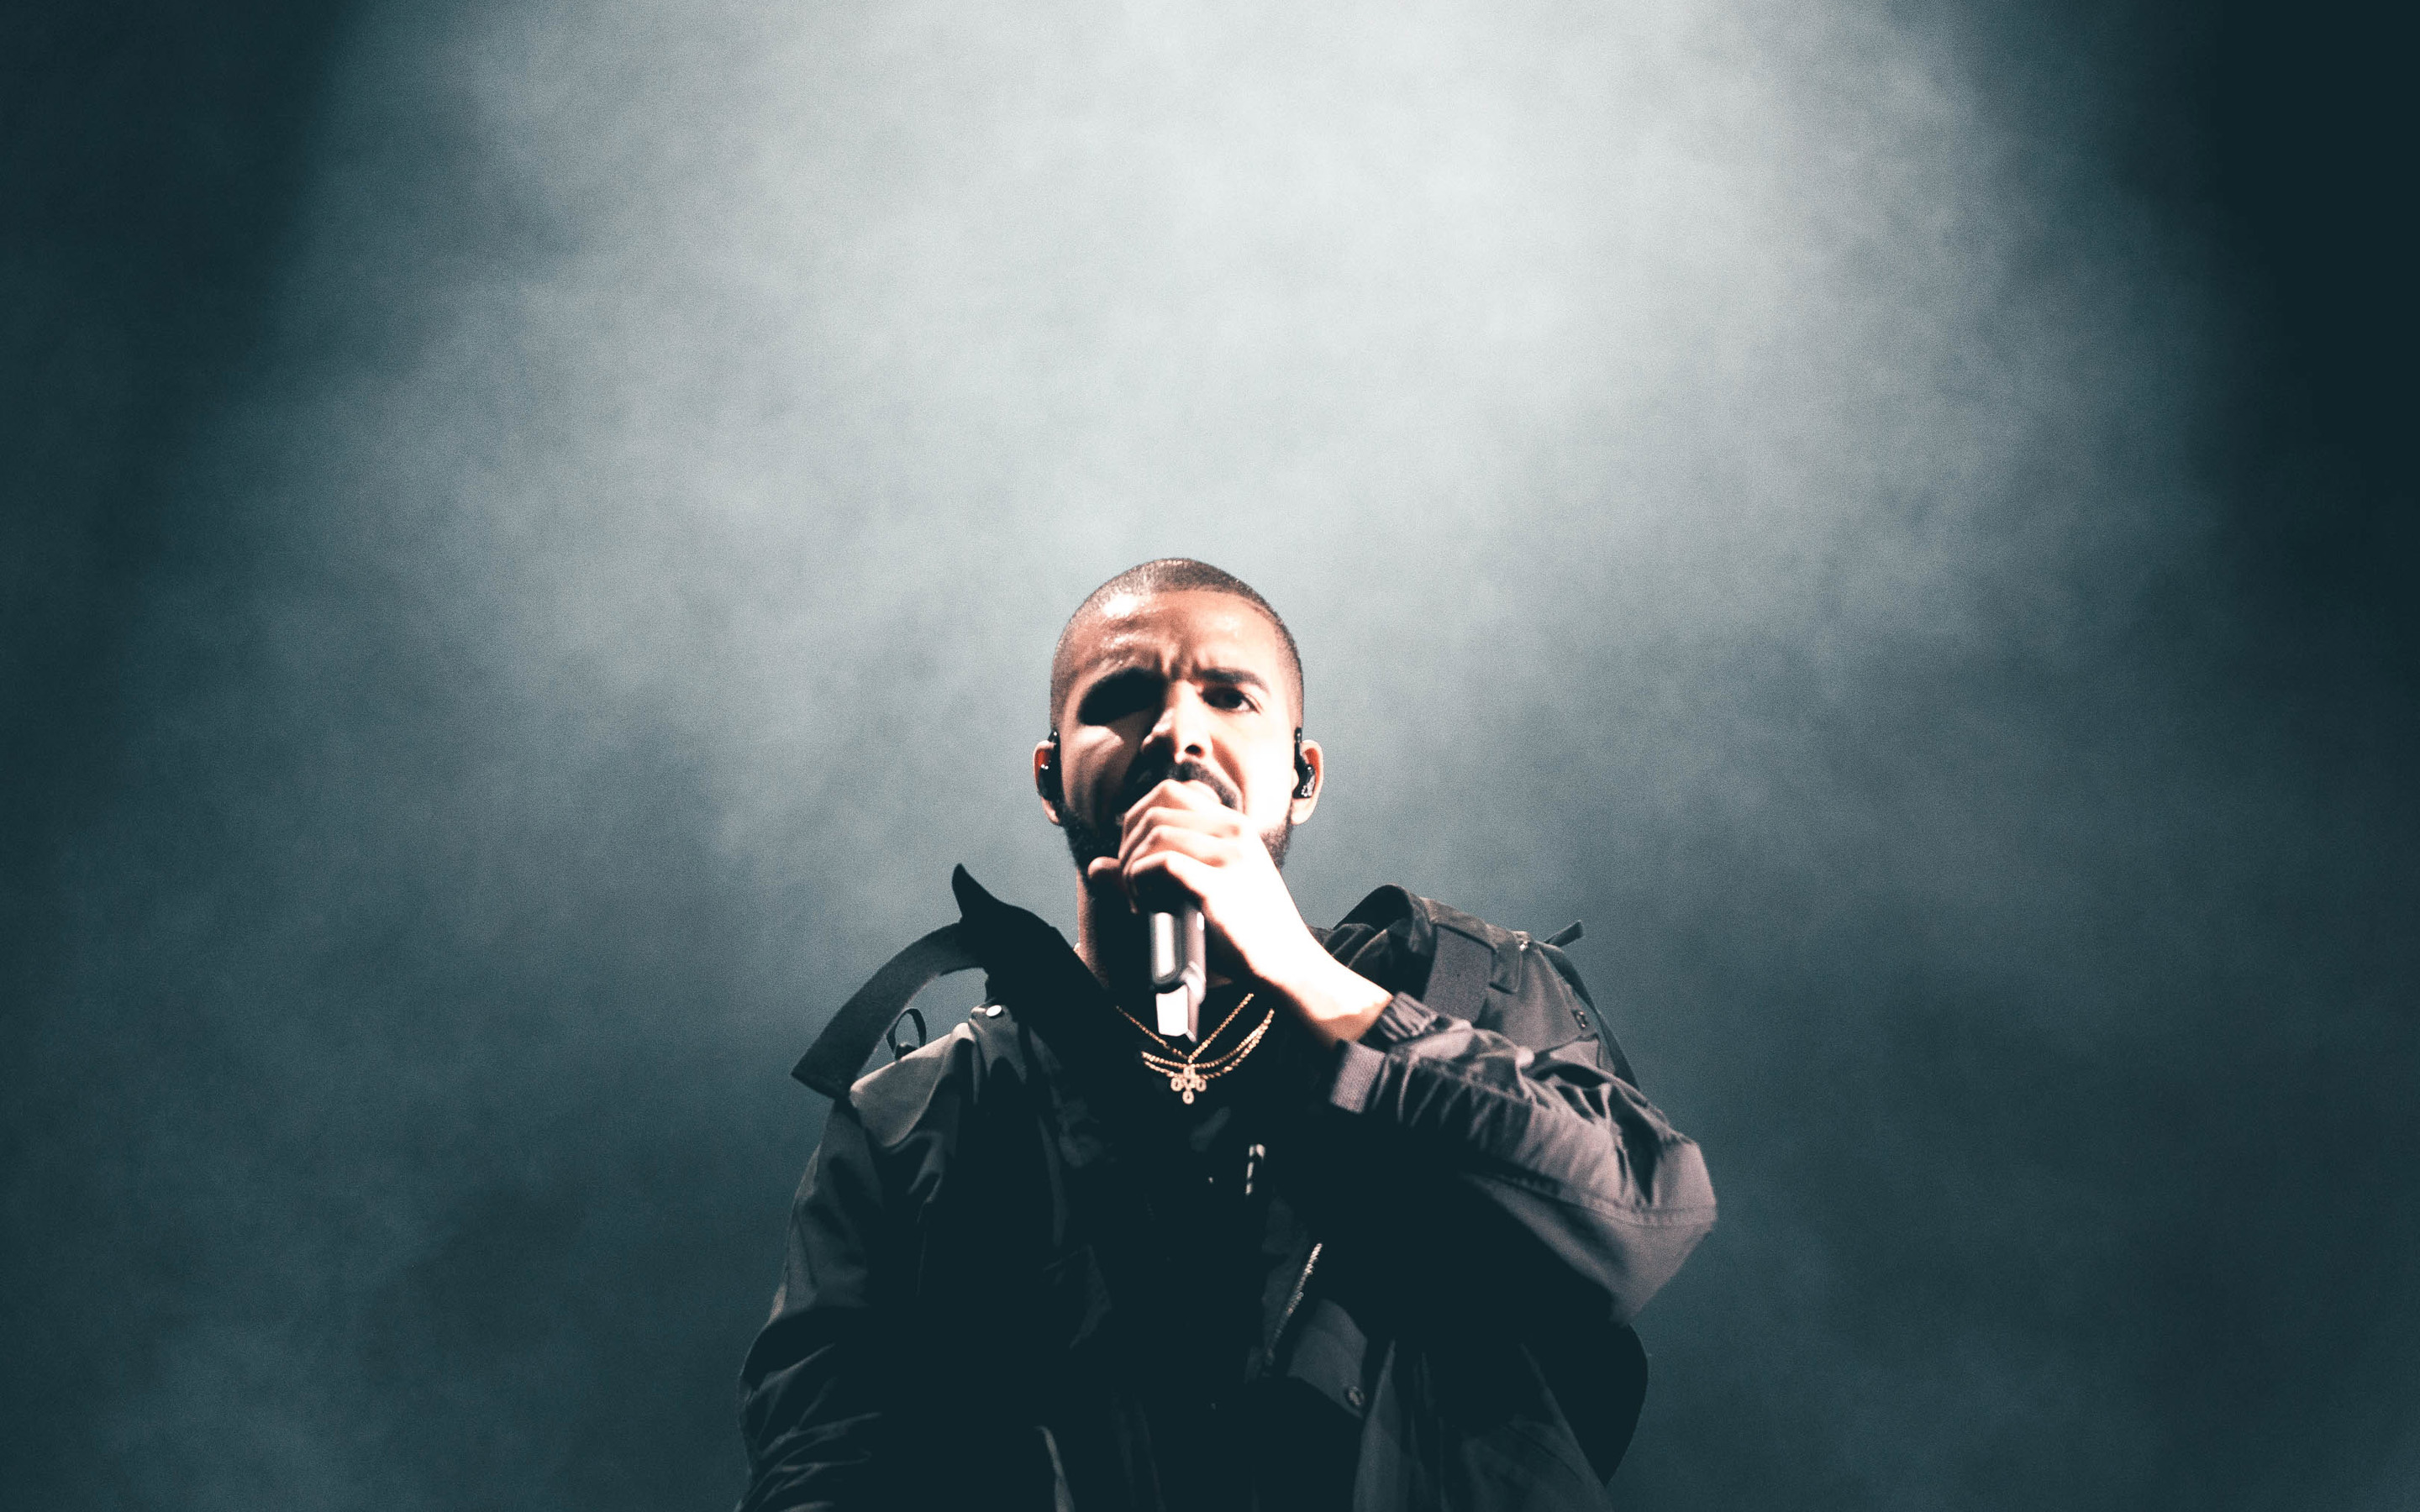 Download wallpaper Drake, concert, canadian rapper, music stars, Aubrey Drake Graham, photohoot, Drake with microphone for desktop with resolution 2880x1800. High Quality HD picture wallpaper